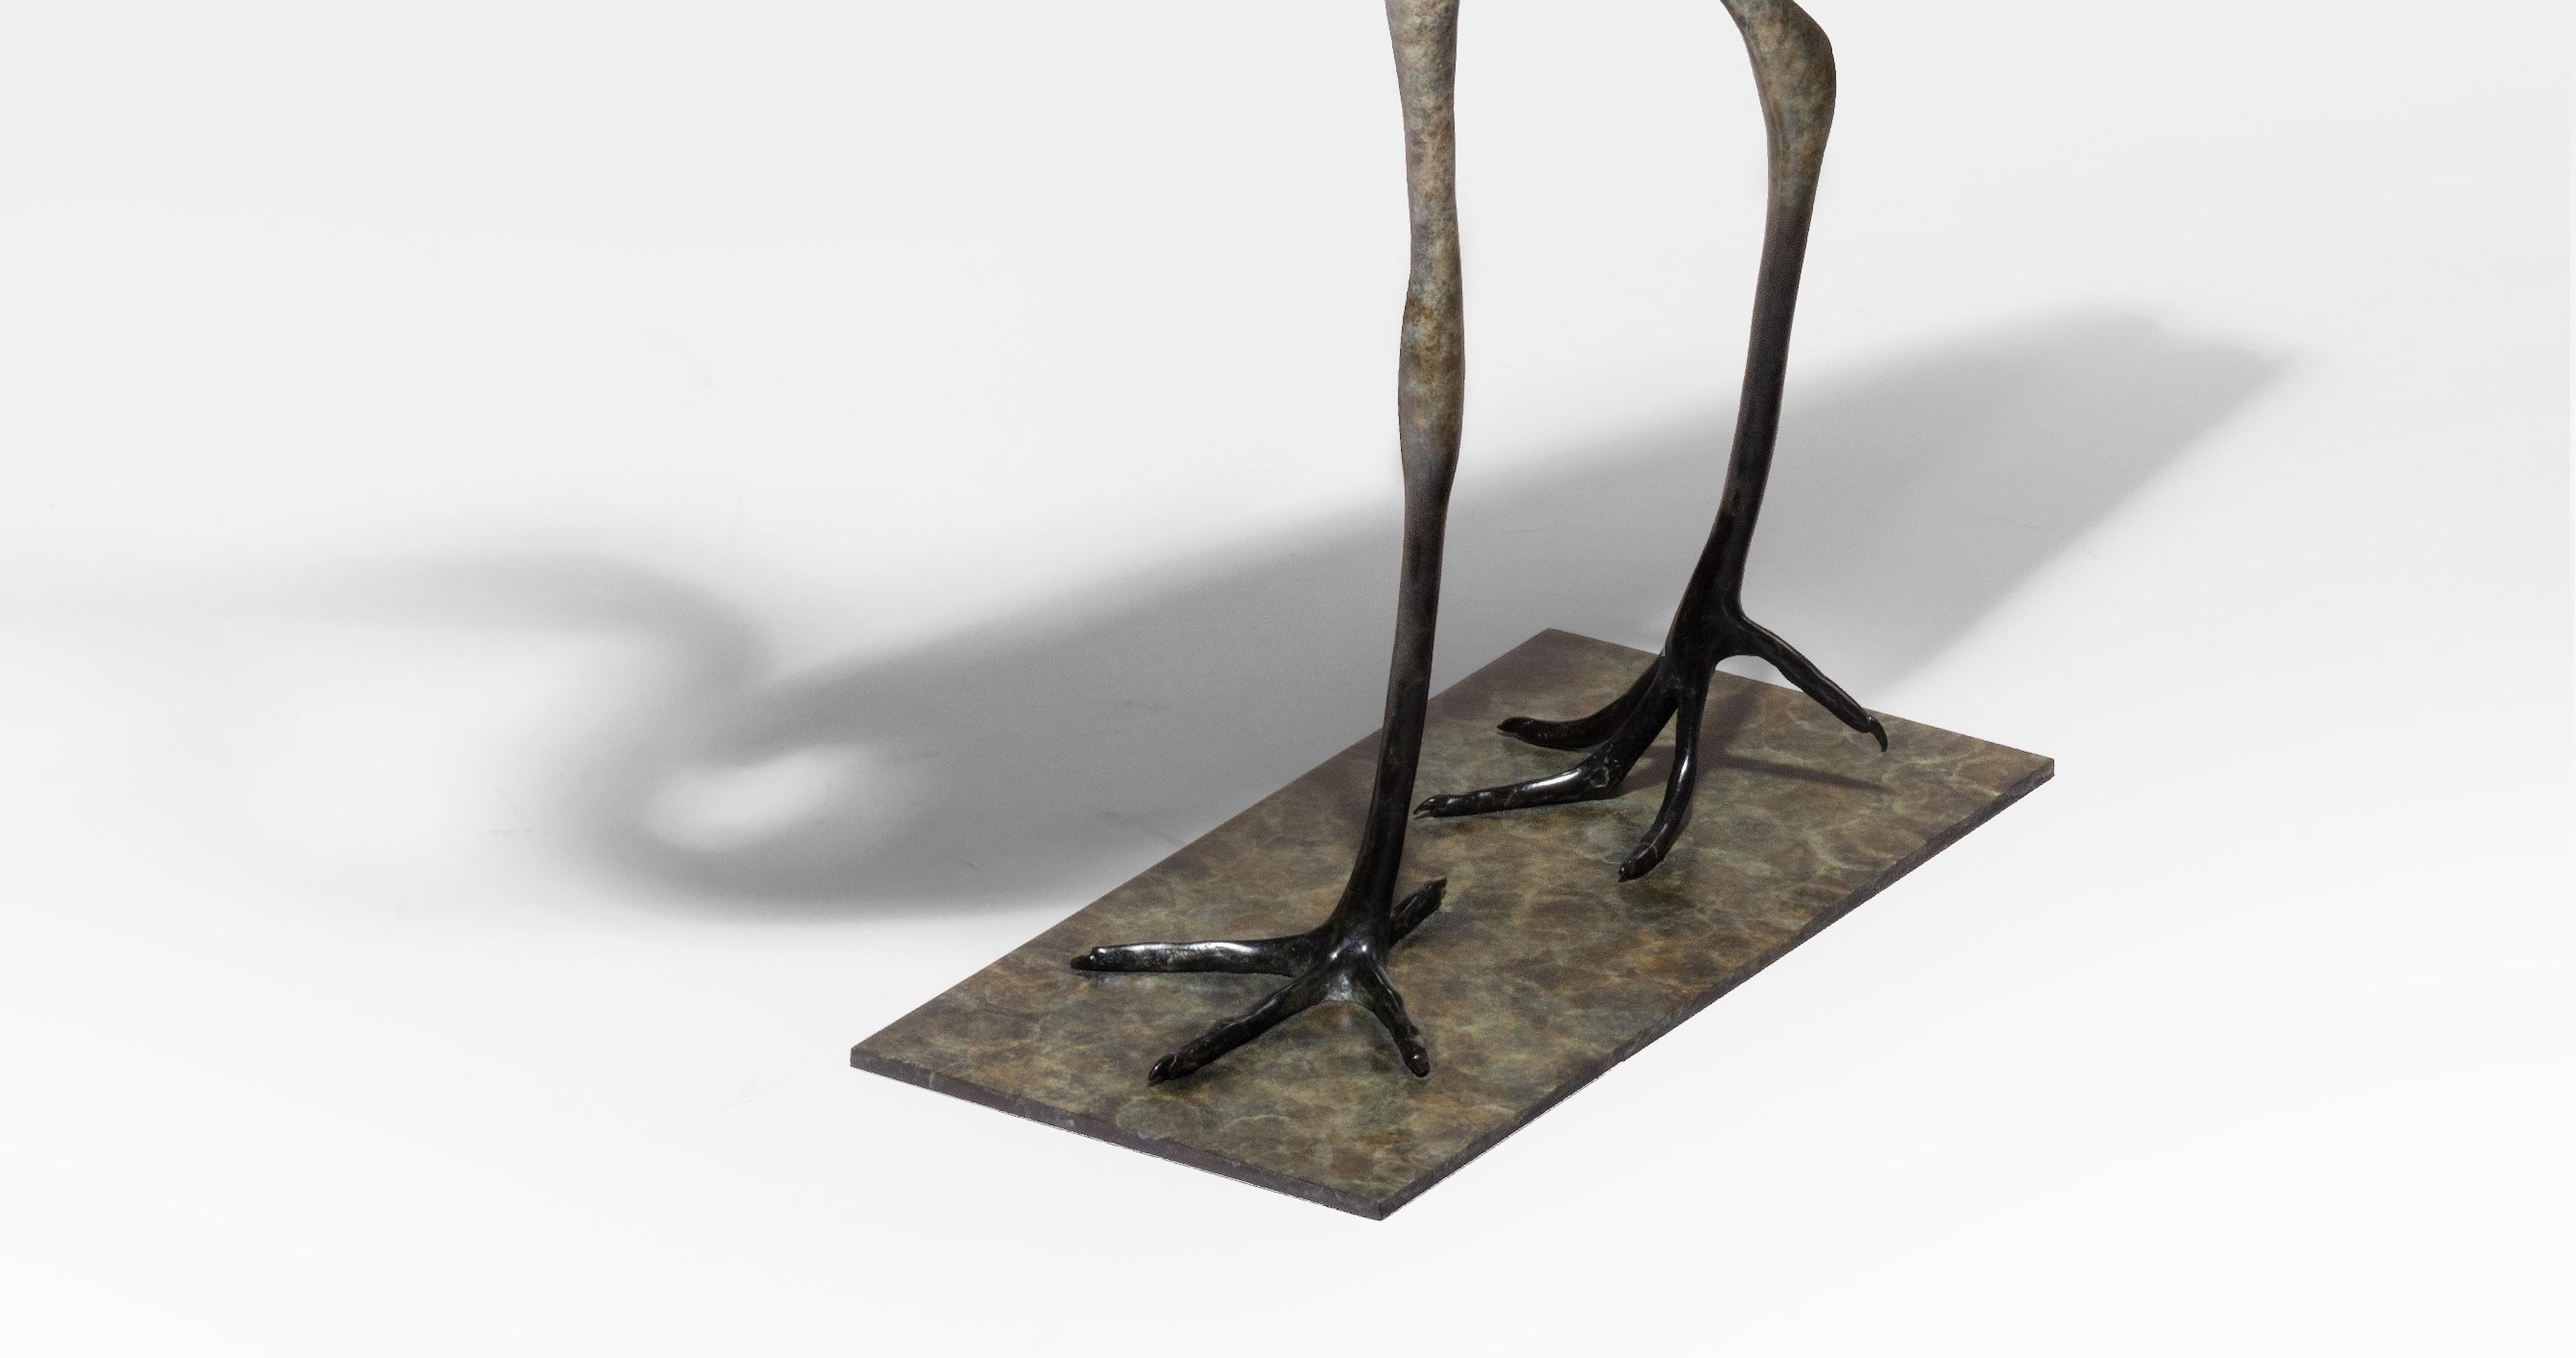 'Heron' is a stunningly elegant Bronze sculpture. Richard Smith conveys so much character in such simple lines, exemplifying a truly wonderful talent. The fantastic richly detailed textured Patina really adds to the depth of the work.

Richard Smith